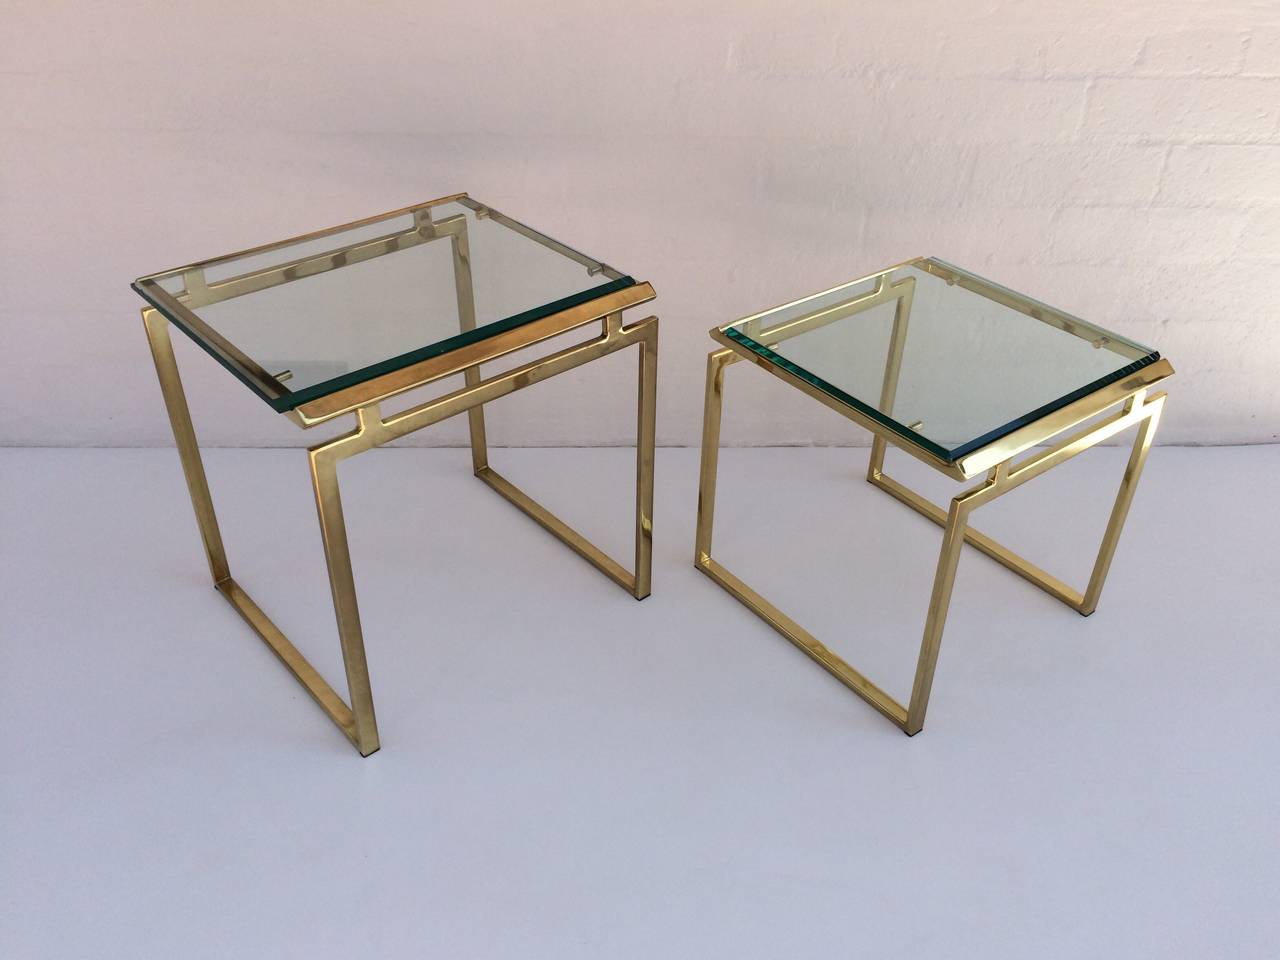 American Polished Brass and Beveled Glass Nesting Tables Designed by Milo Baughman